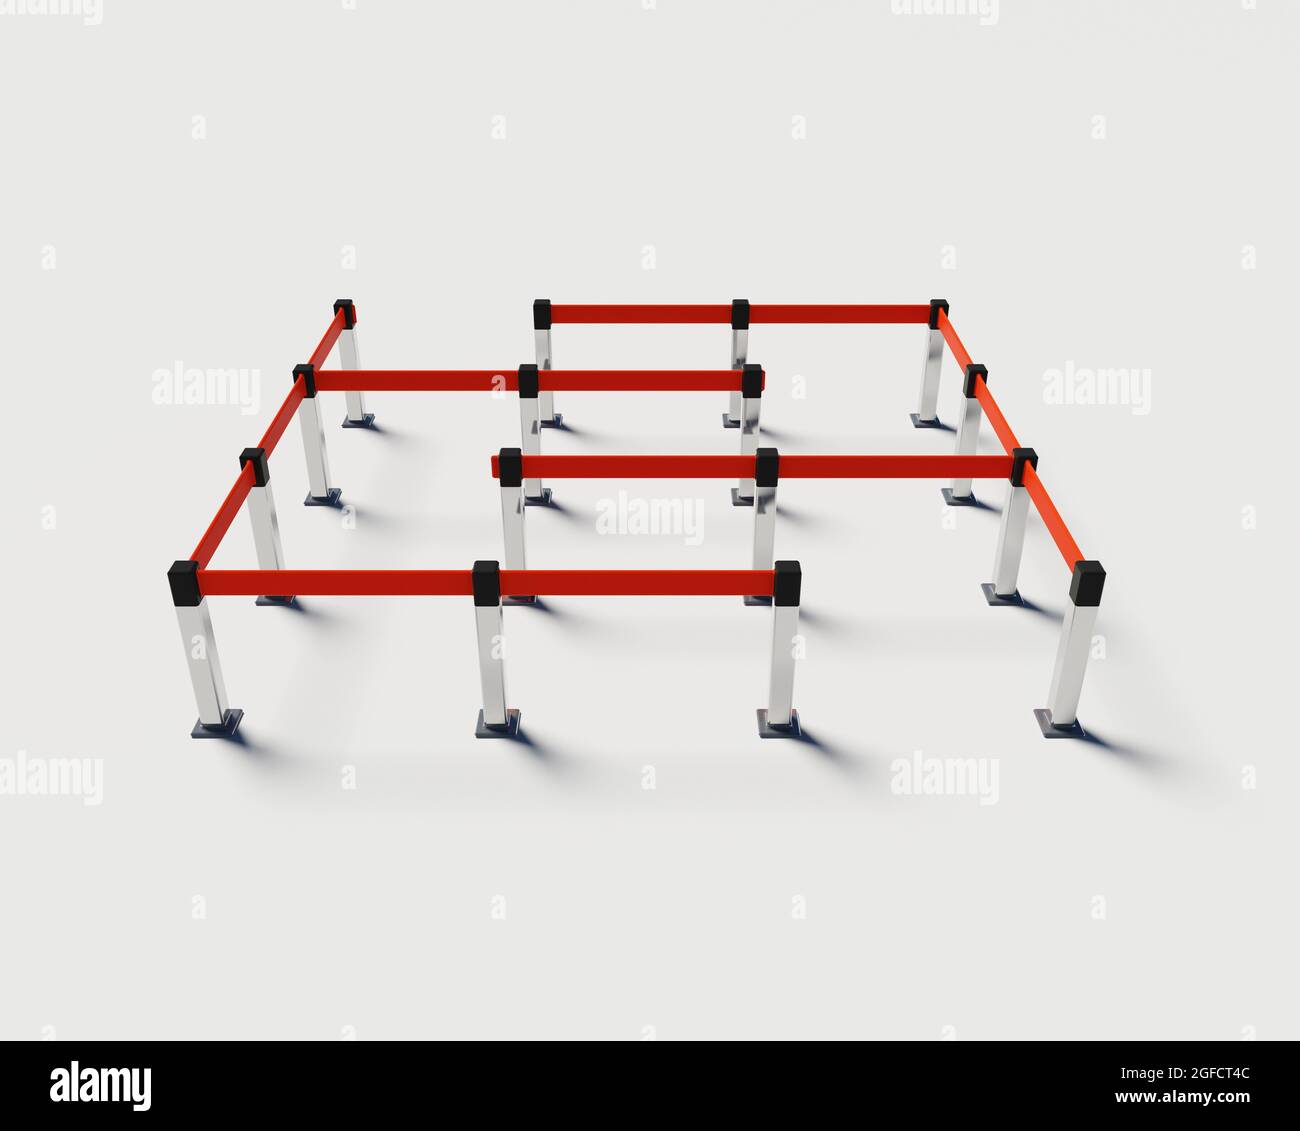 Red Ribbon tape tteel stand barrier on white background. Color isometric illustration on isolated background. Stock Photo